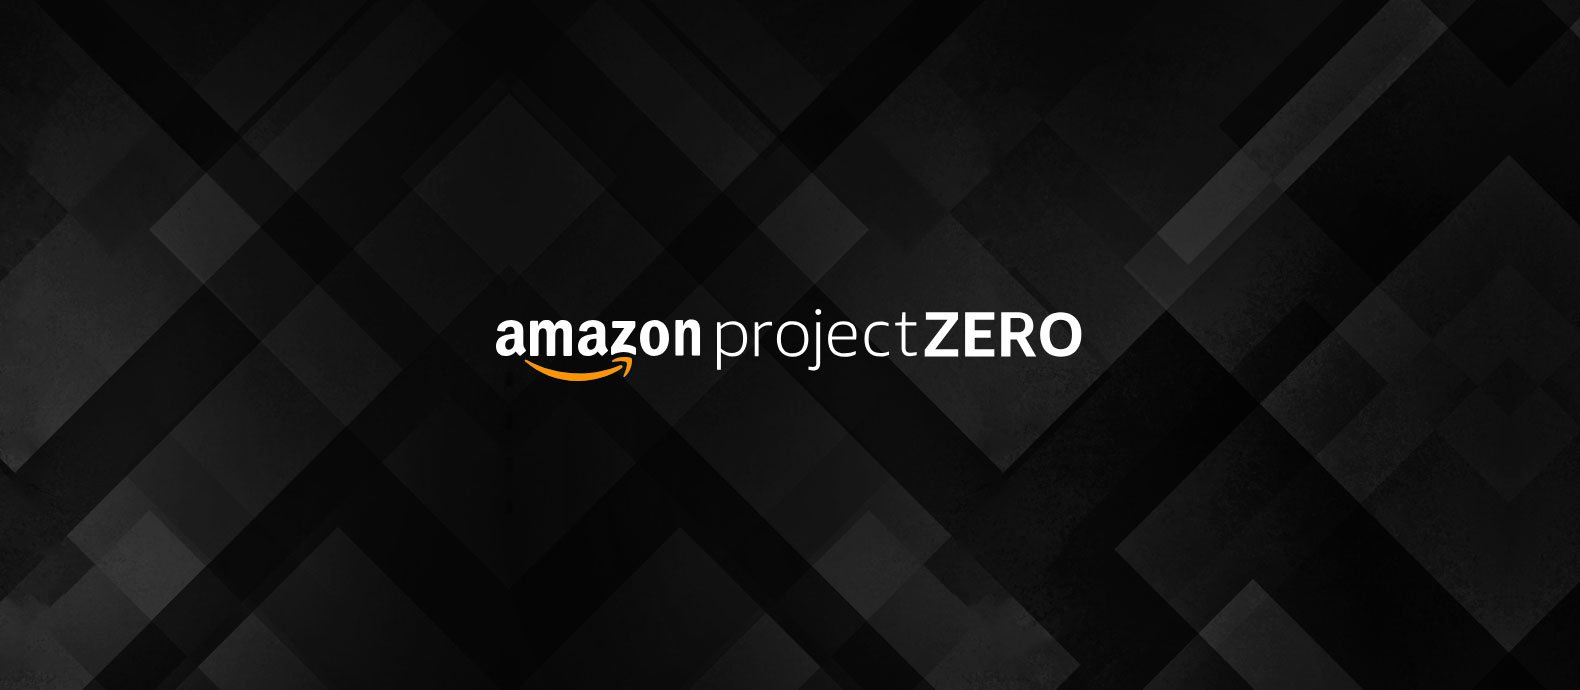 Amazon Project Zero aims to stop counterfeits on its platform